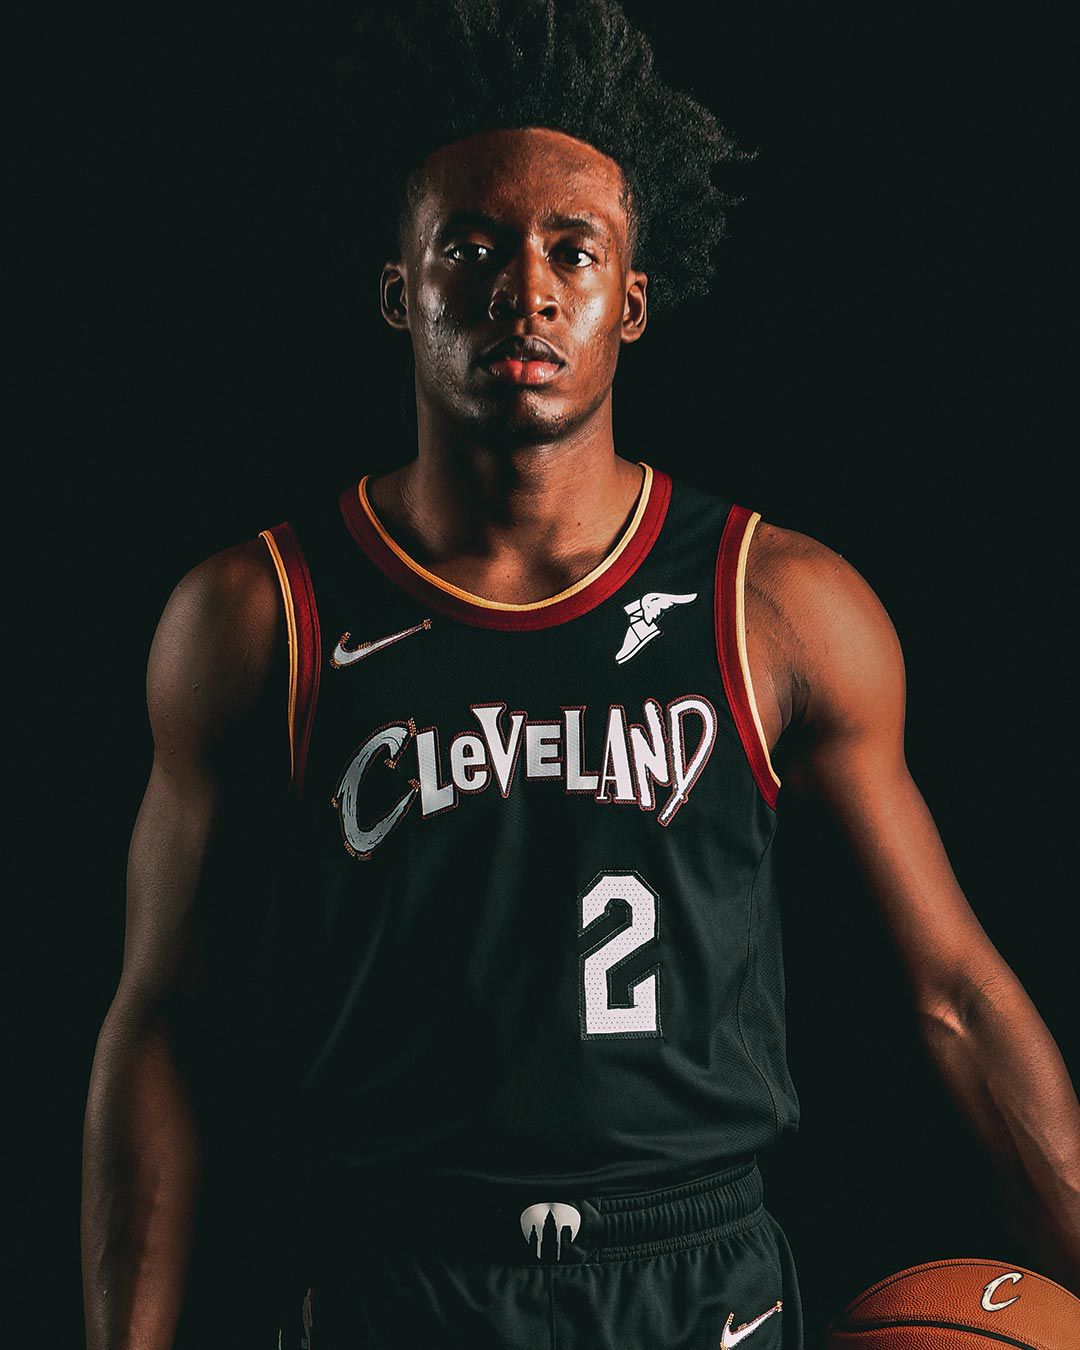 Cavs news: Cleveland unveils rock and roll-inspired City Edition jerseys